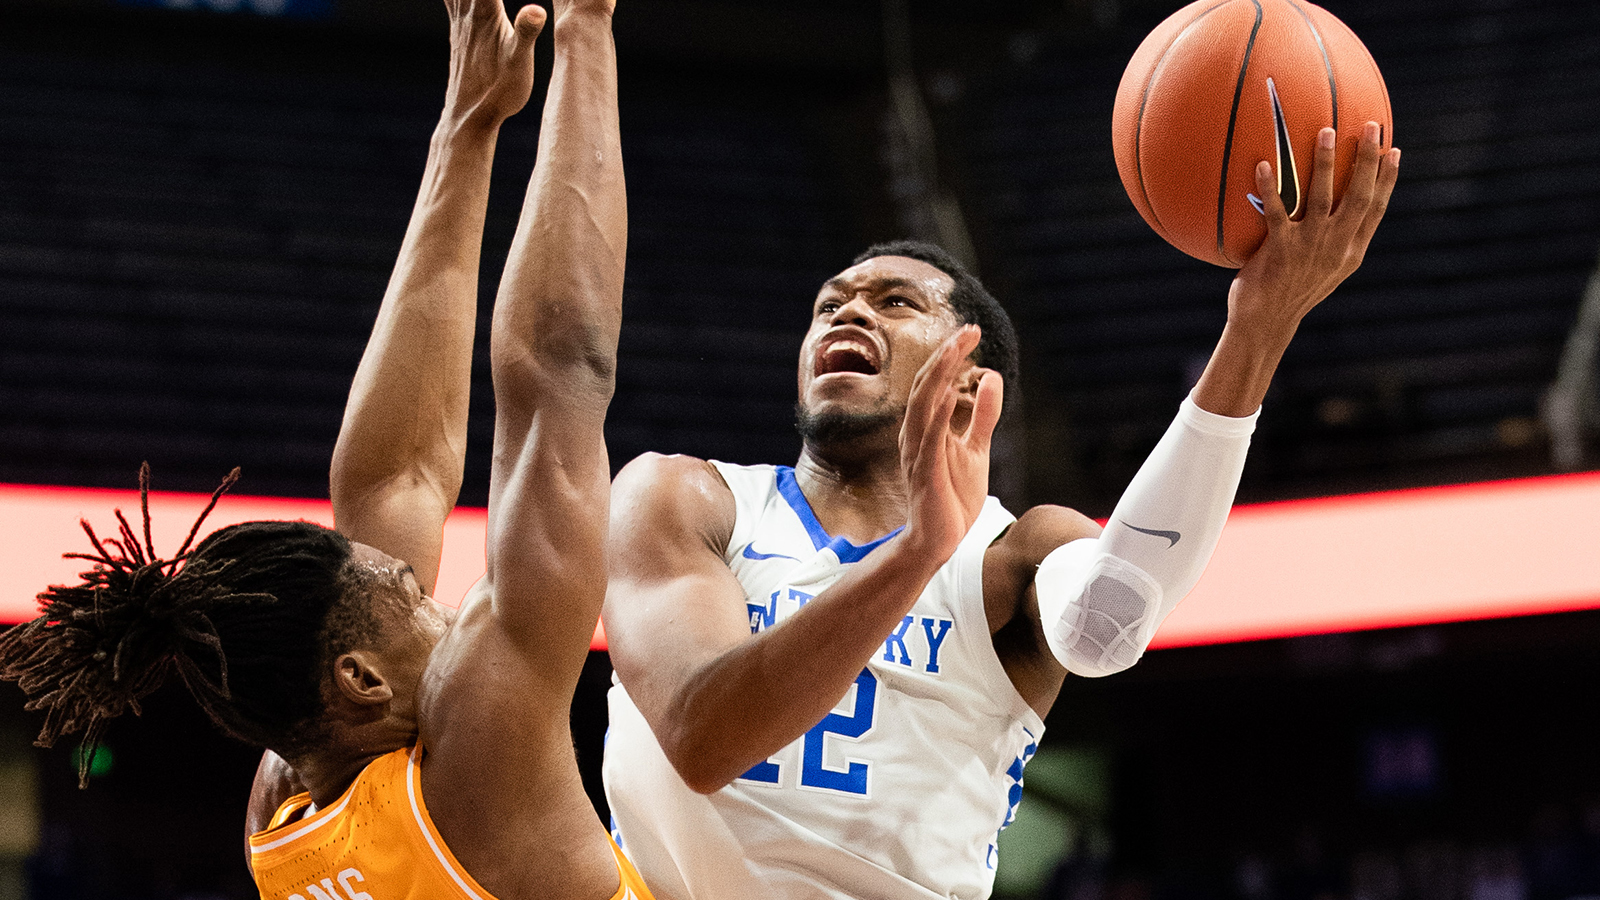 Kentucky Falls to No. 11 Tennessee